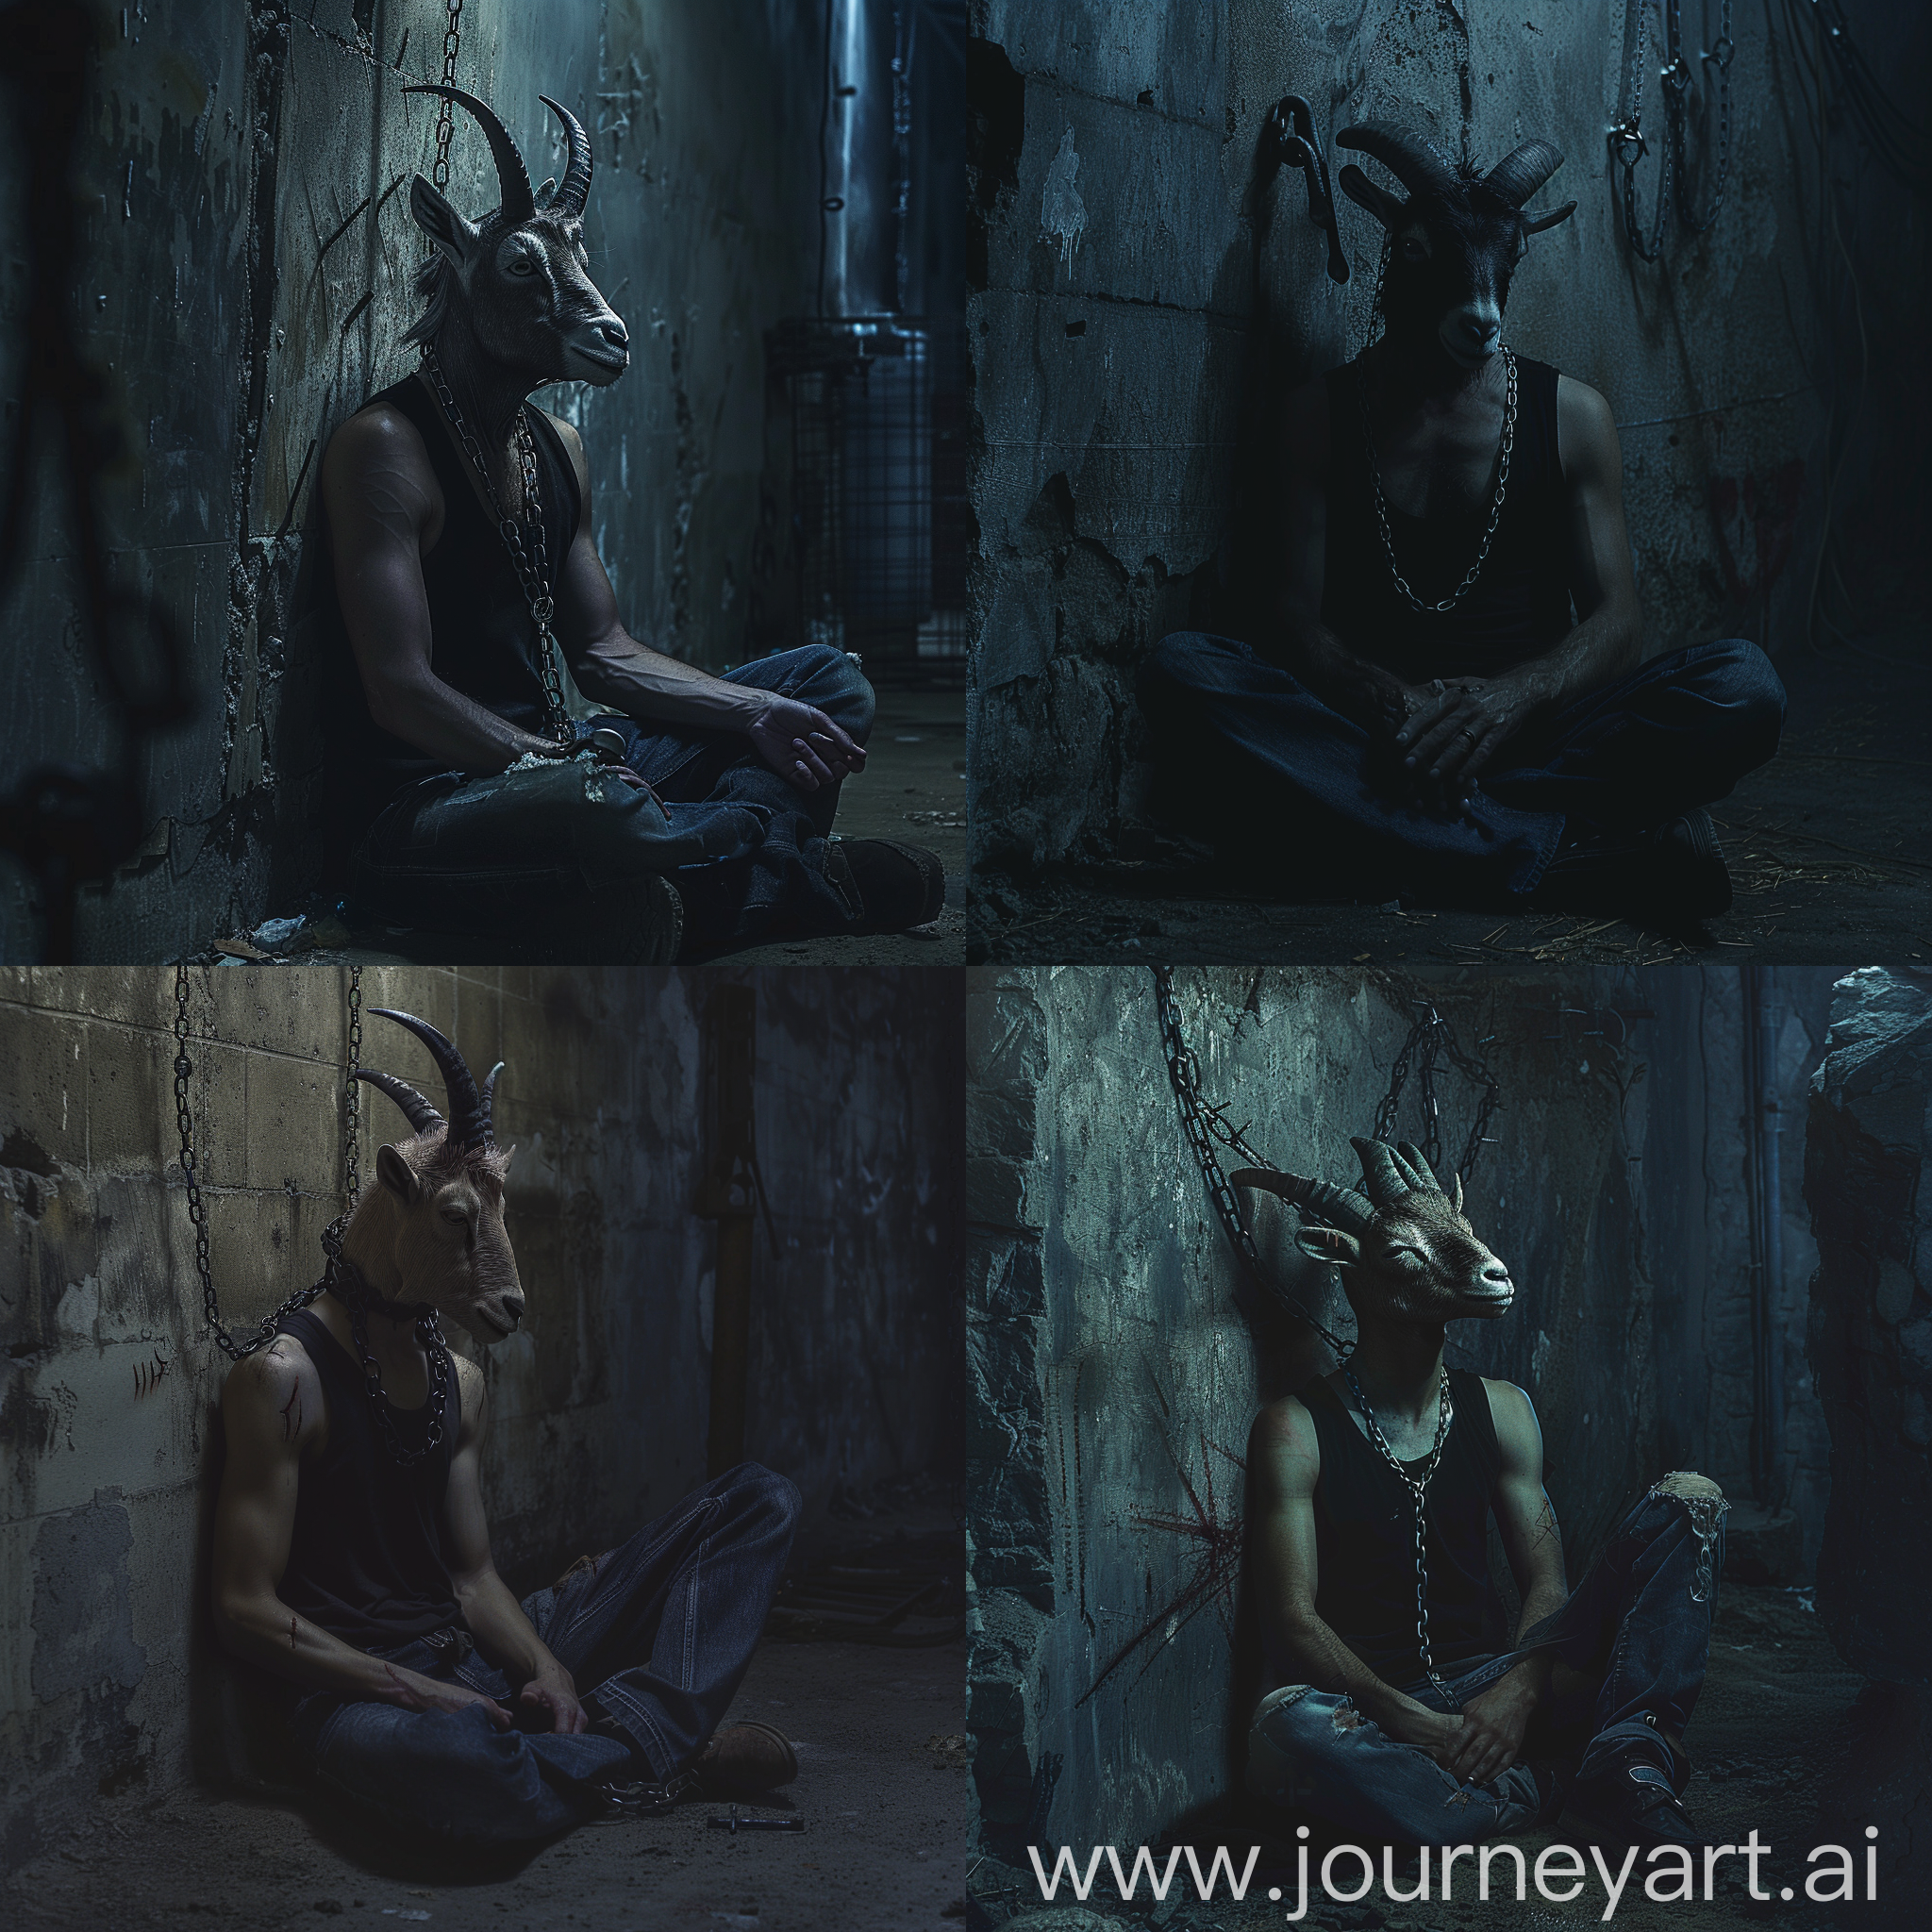 goat headed man, wearing black tank top and jeans, sitting on the ground at dark dungeon, chained on his neck, there are nail marks on the wall, midnight, dark eerie, creepy atmosphere, dramatic lighting